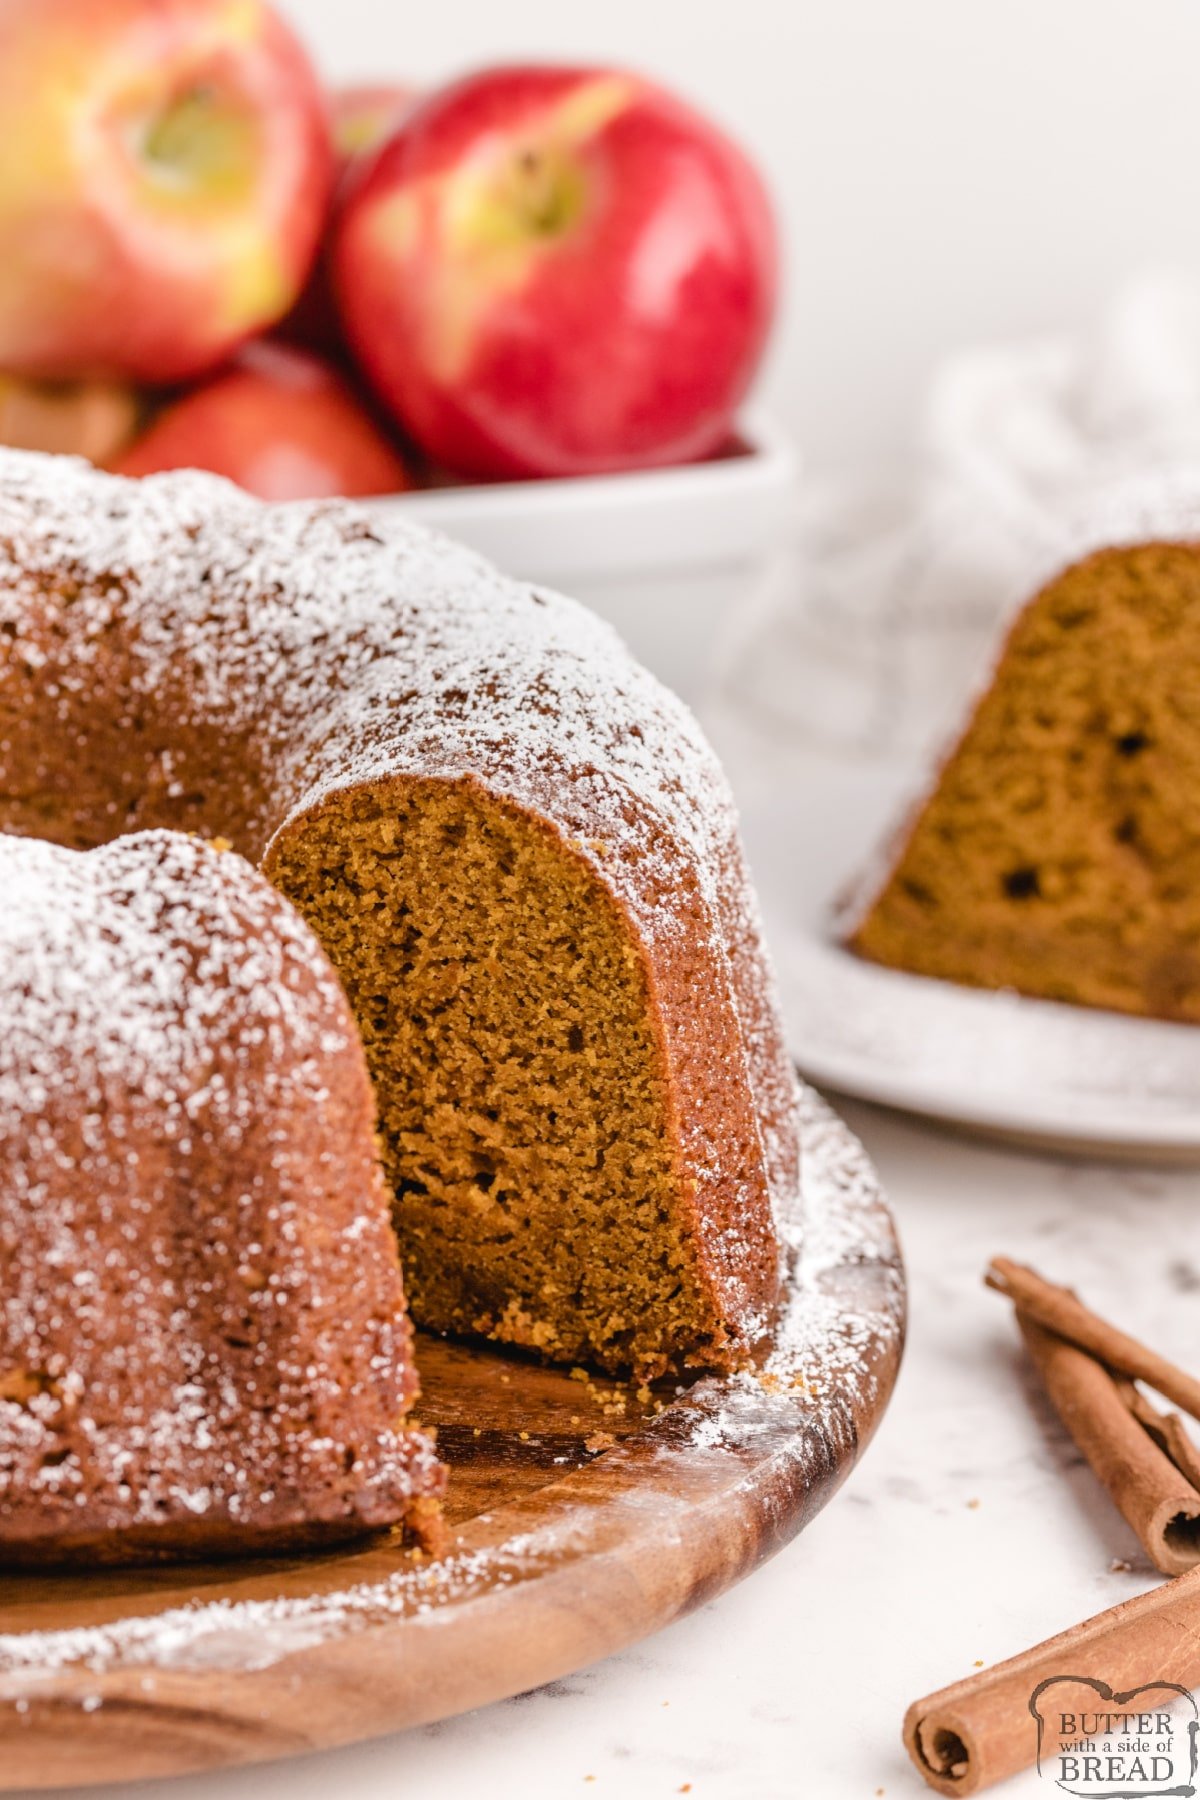 Pumpkin Apple Gingerbread made with canned pumpkin and shredded apple. All of your favorite fall flavors in one delicious gingerbread recipe!